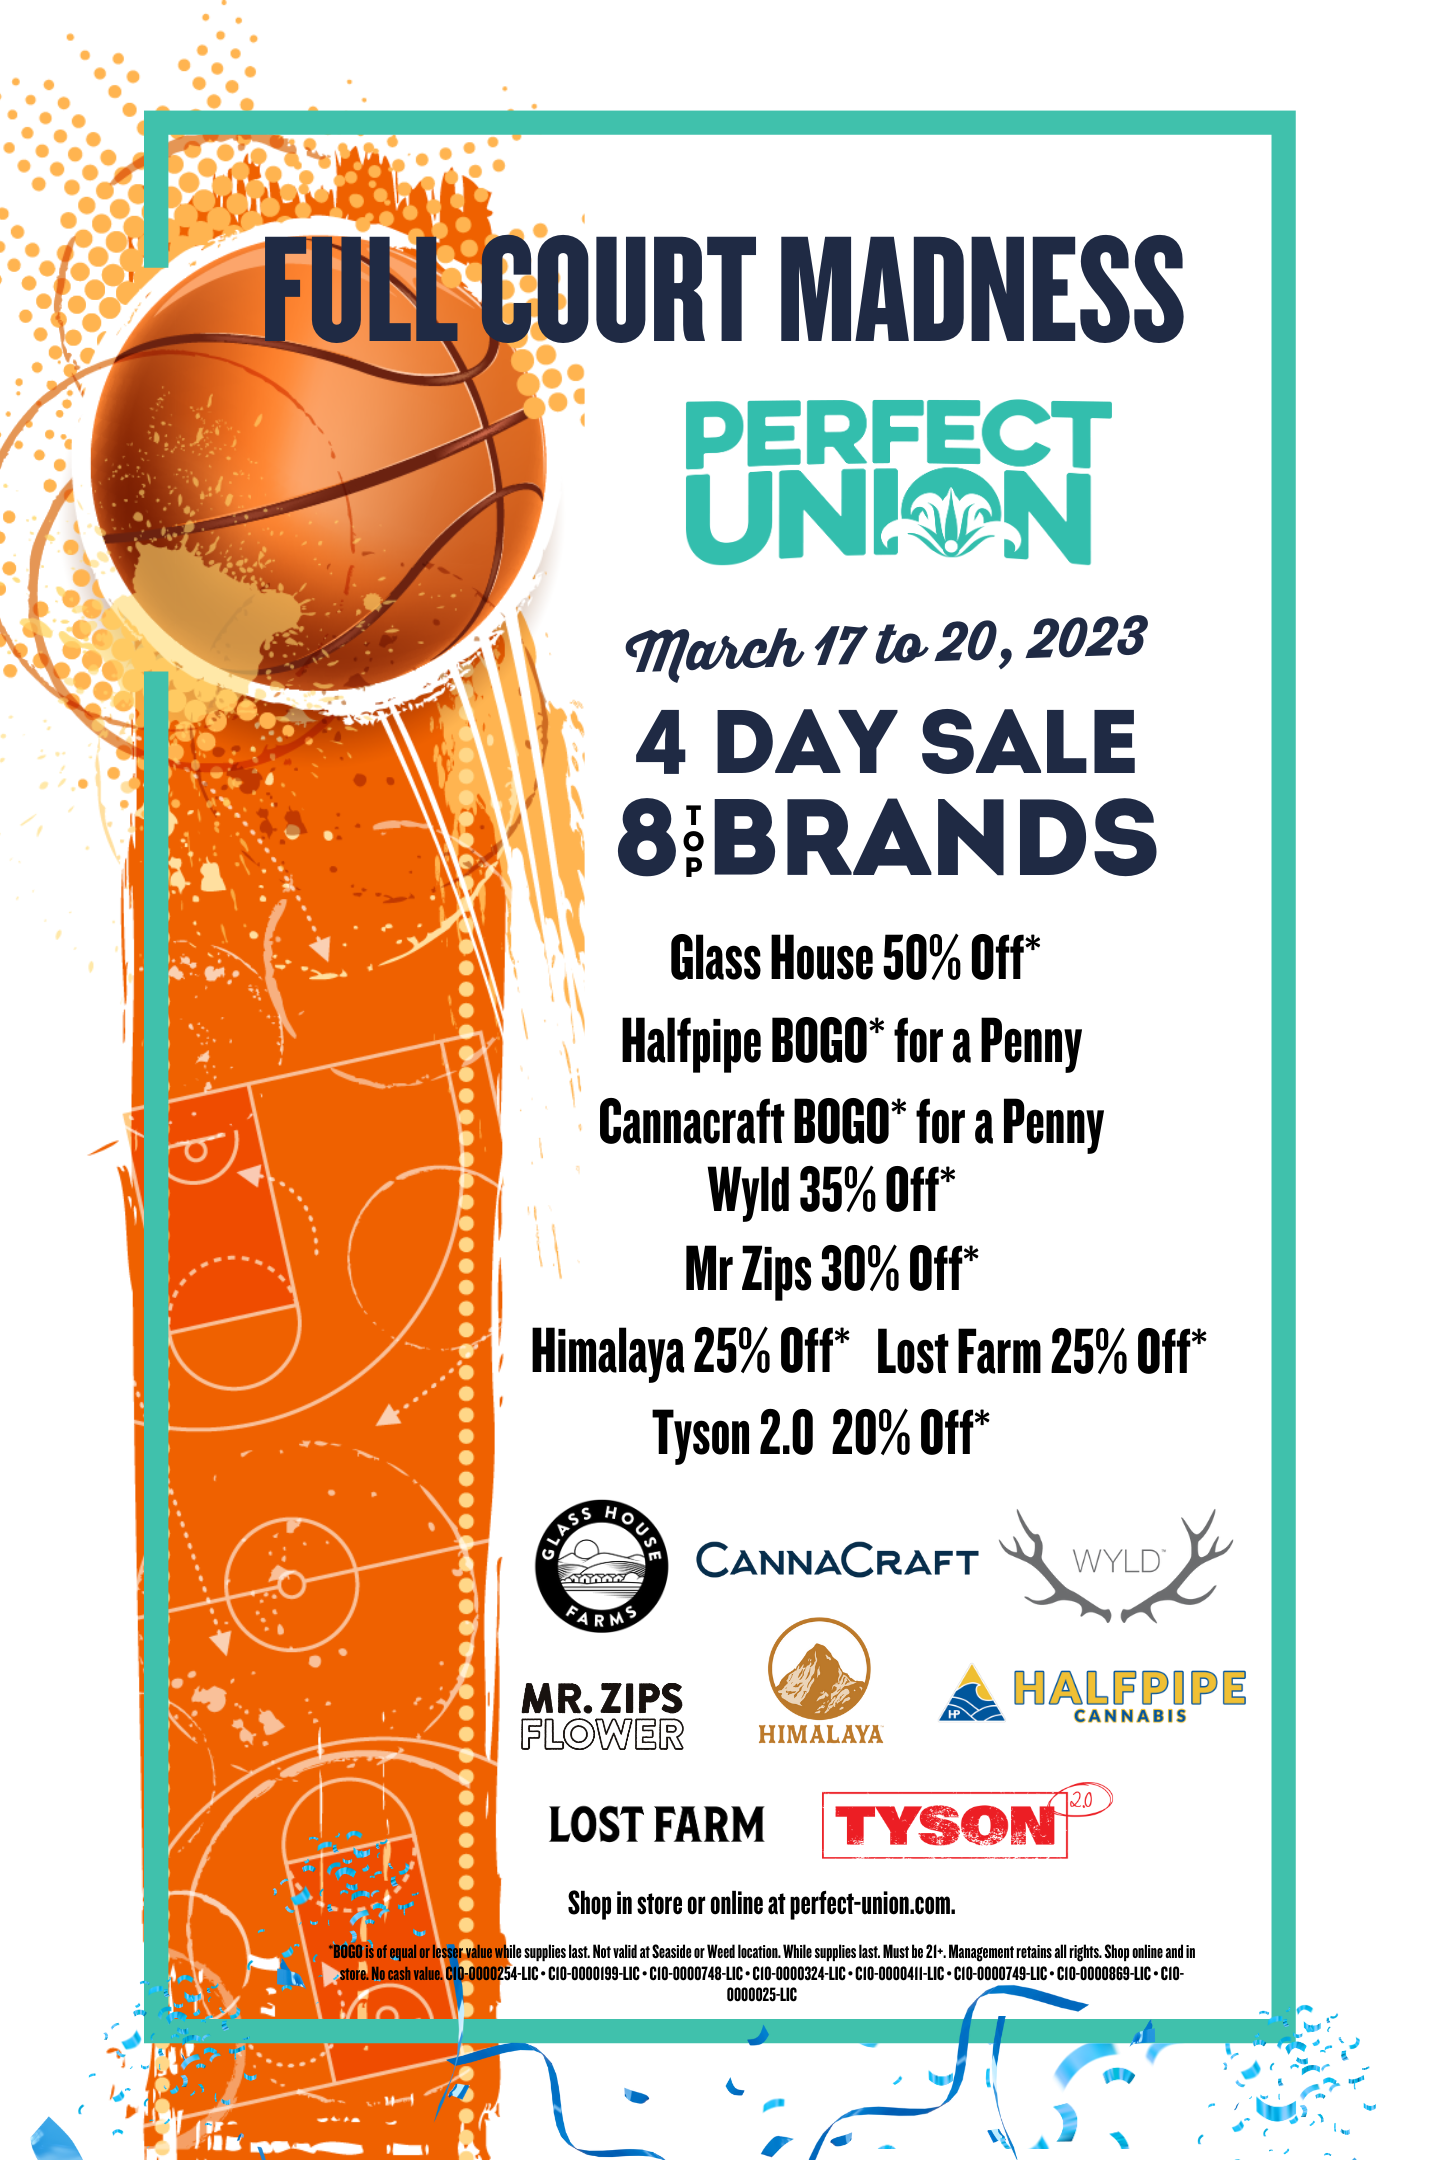 Perfect Union March Full Court Madness sale march 17 to march 20 2023